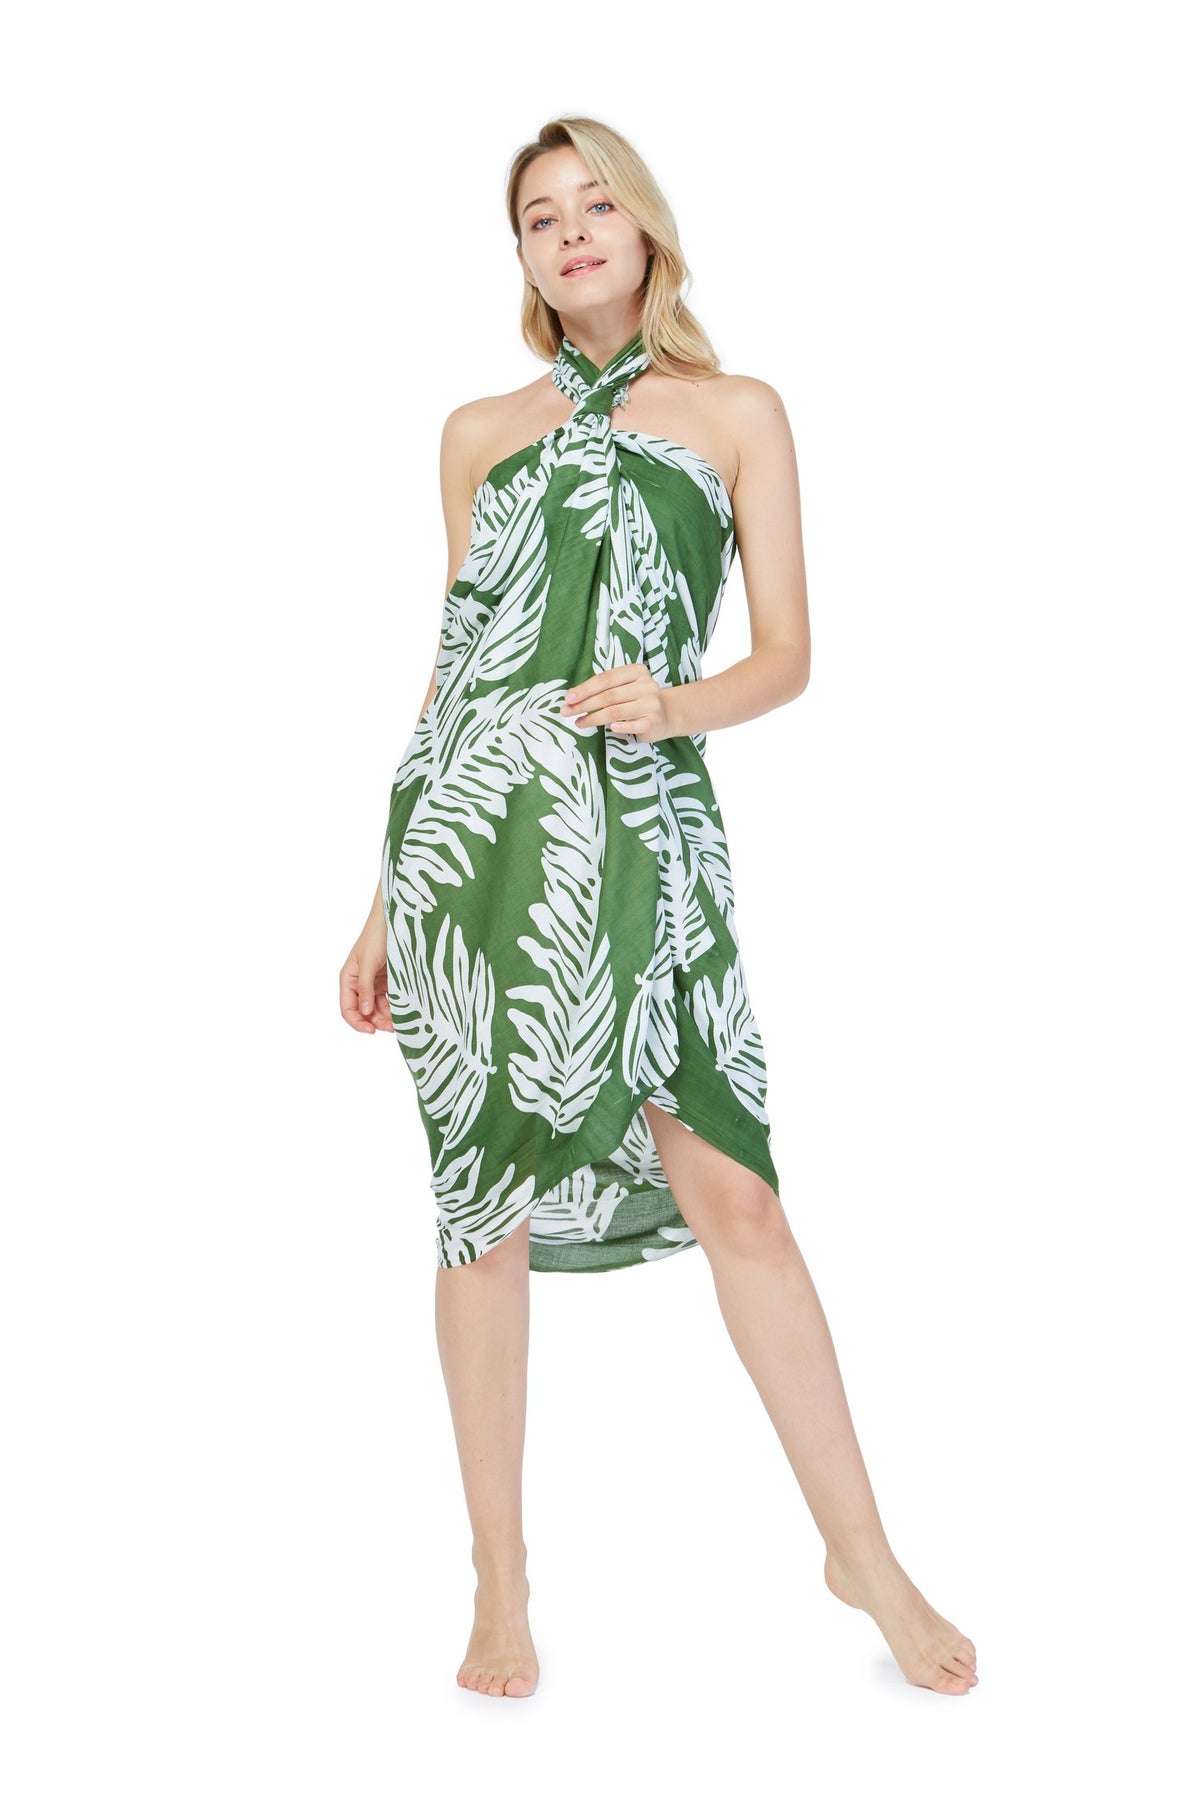 Hawaii Sarong Dress Swim Cover up Beach Wear in Giant Palm Leaves Green ...